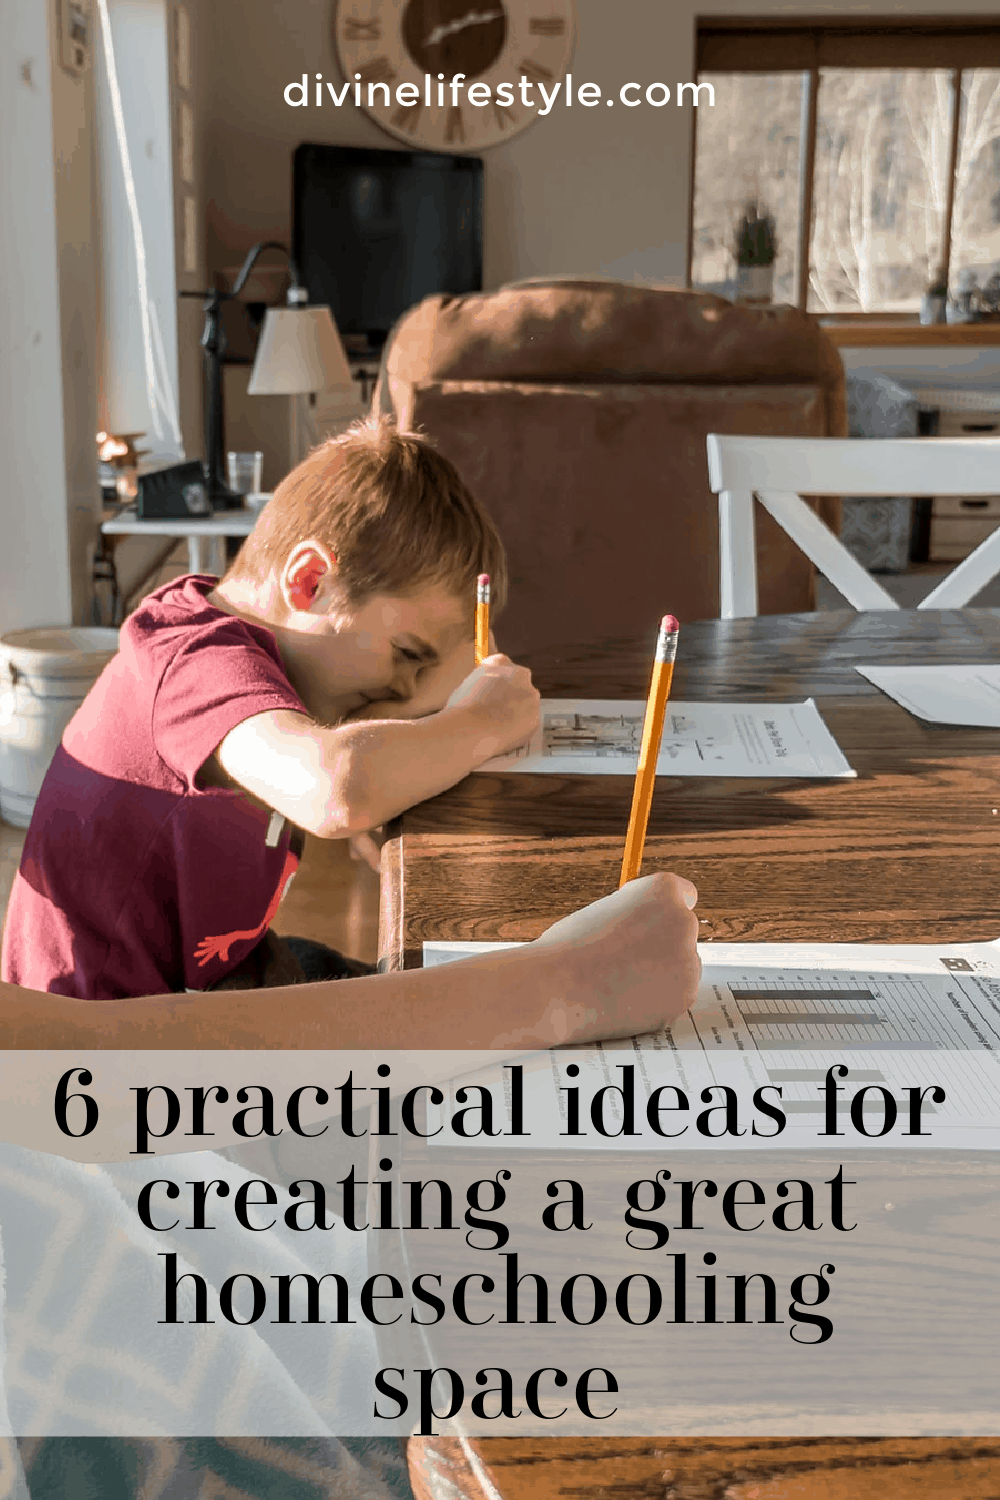 6 practical ideas for creating a great homeschooling space